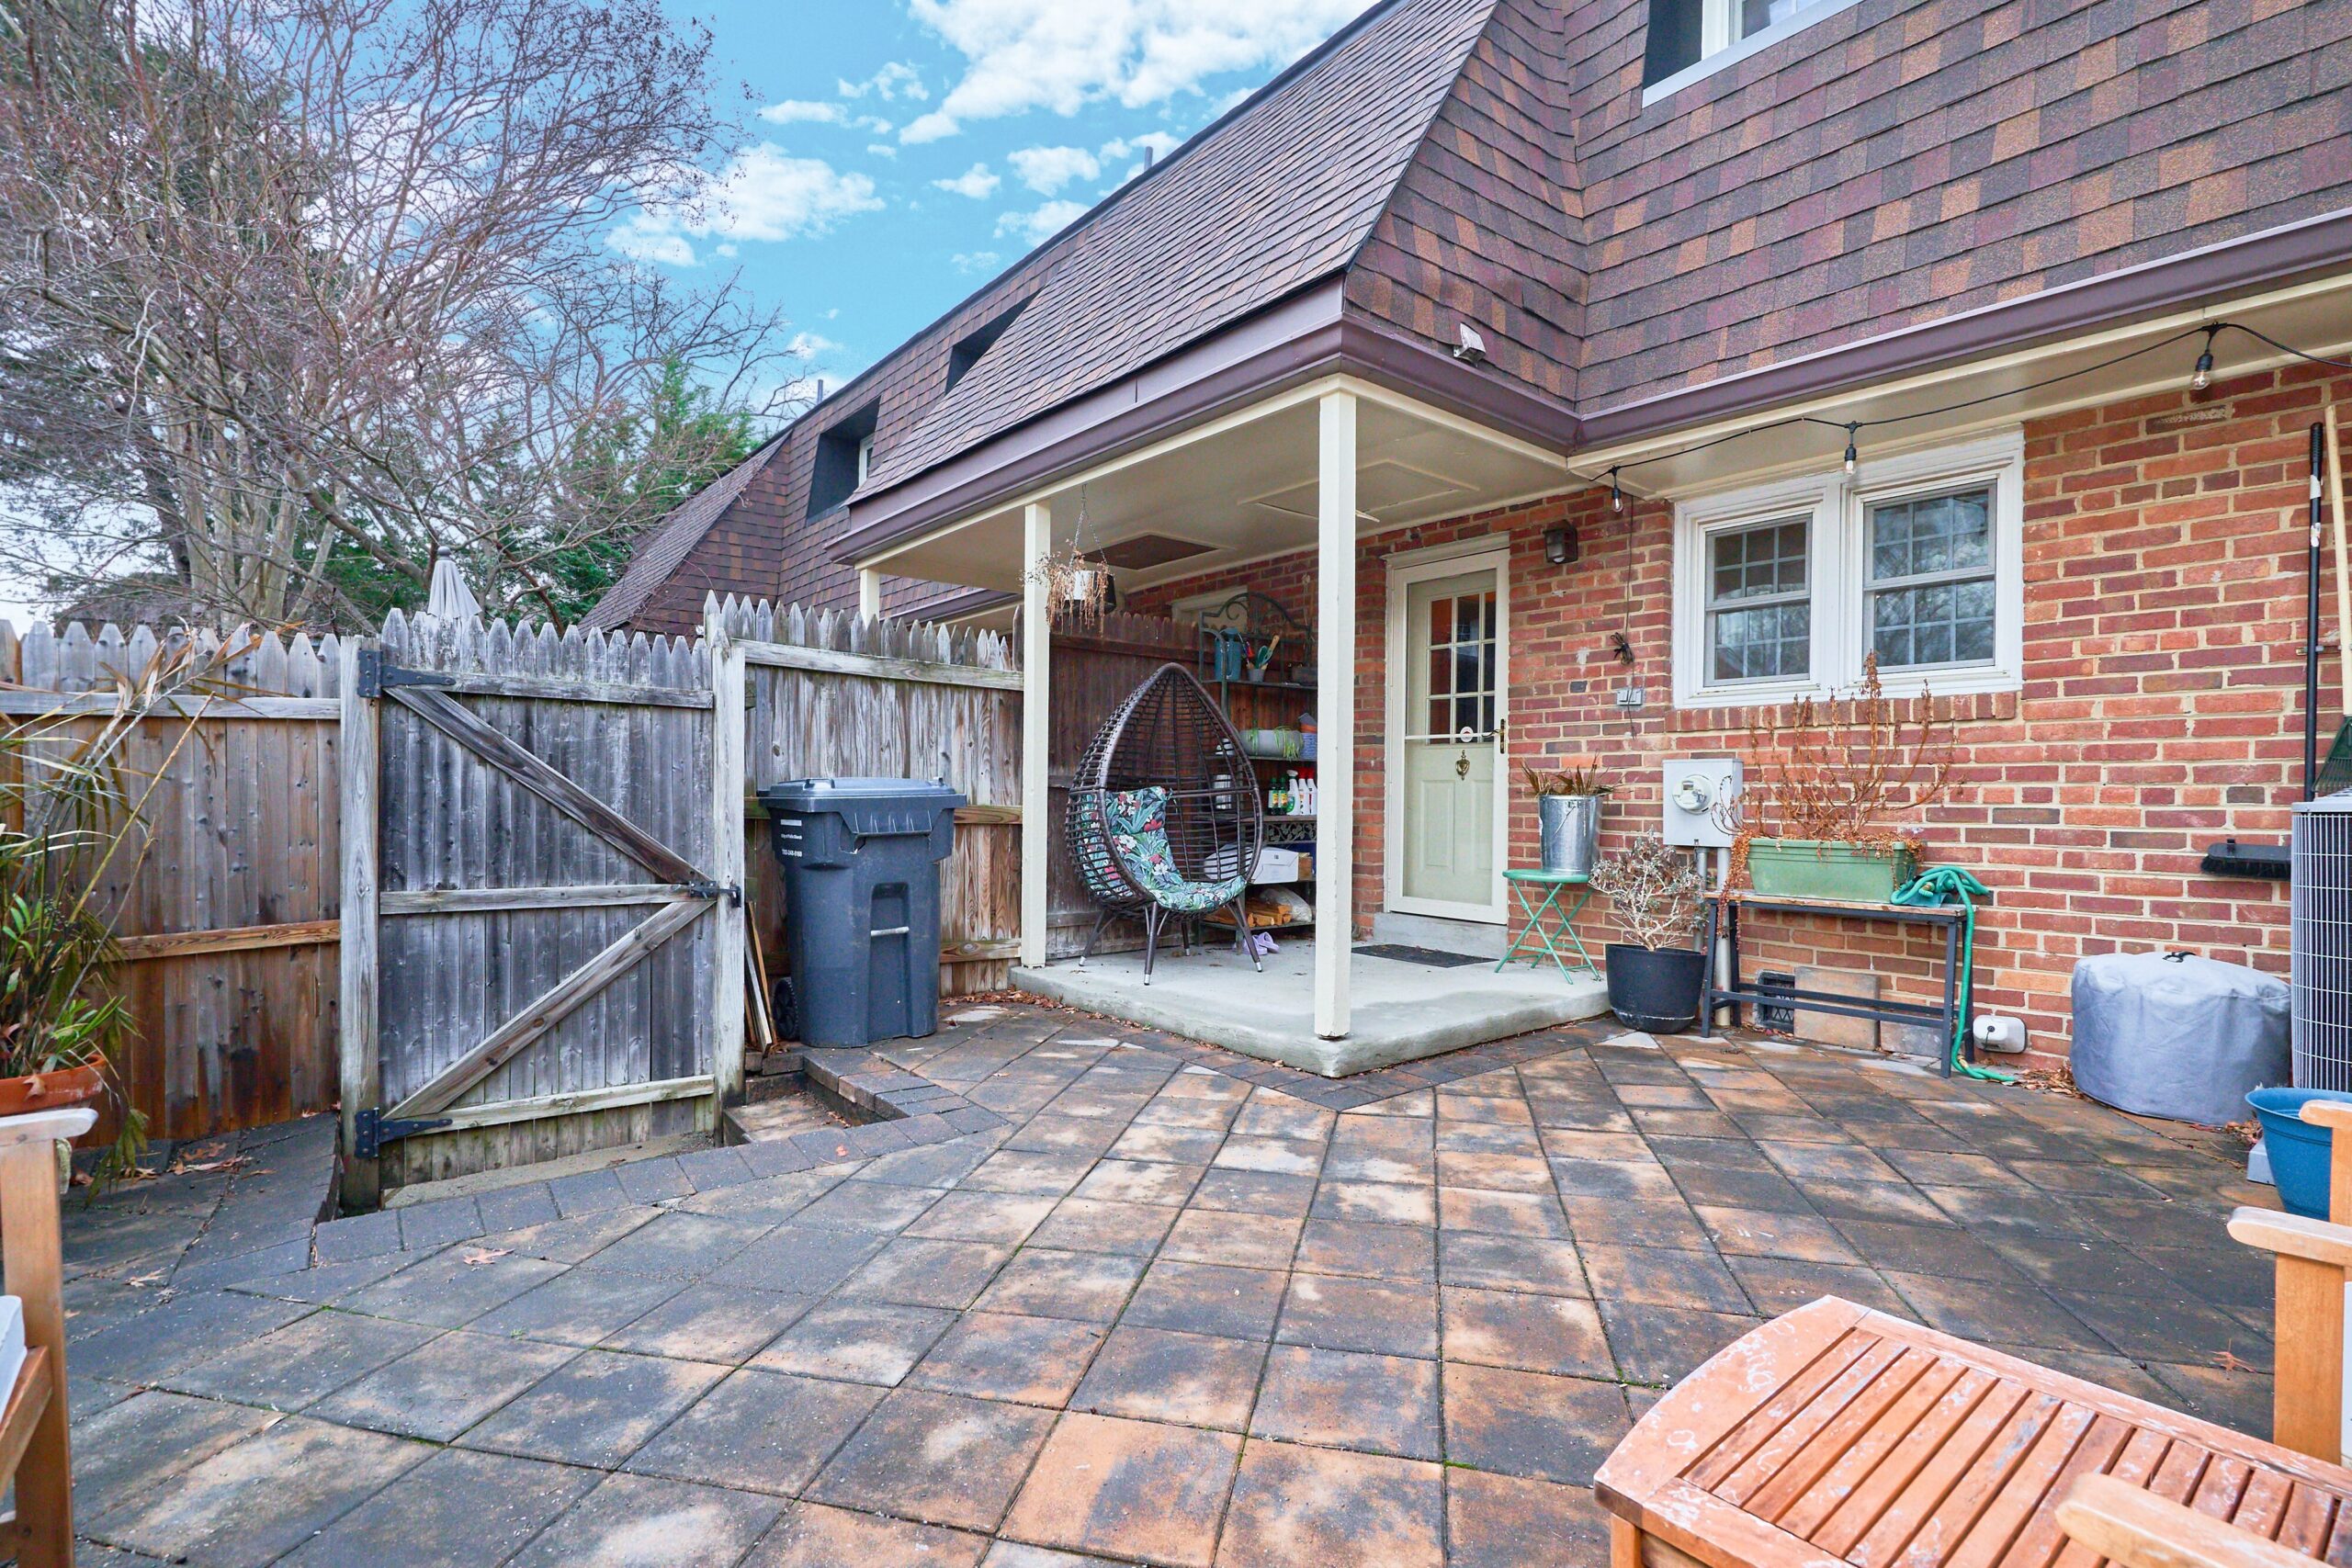 Professional exterior photo of 415 James Ct in Falls Church City - showing the rear fenced patio with covered back porch, brick exterior, and wooden gate to exit.